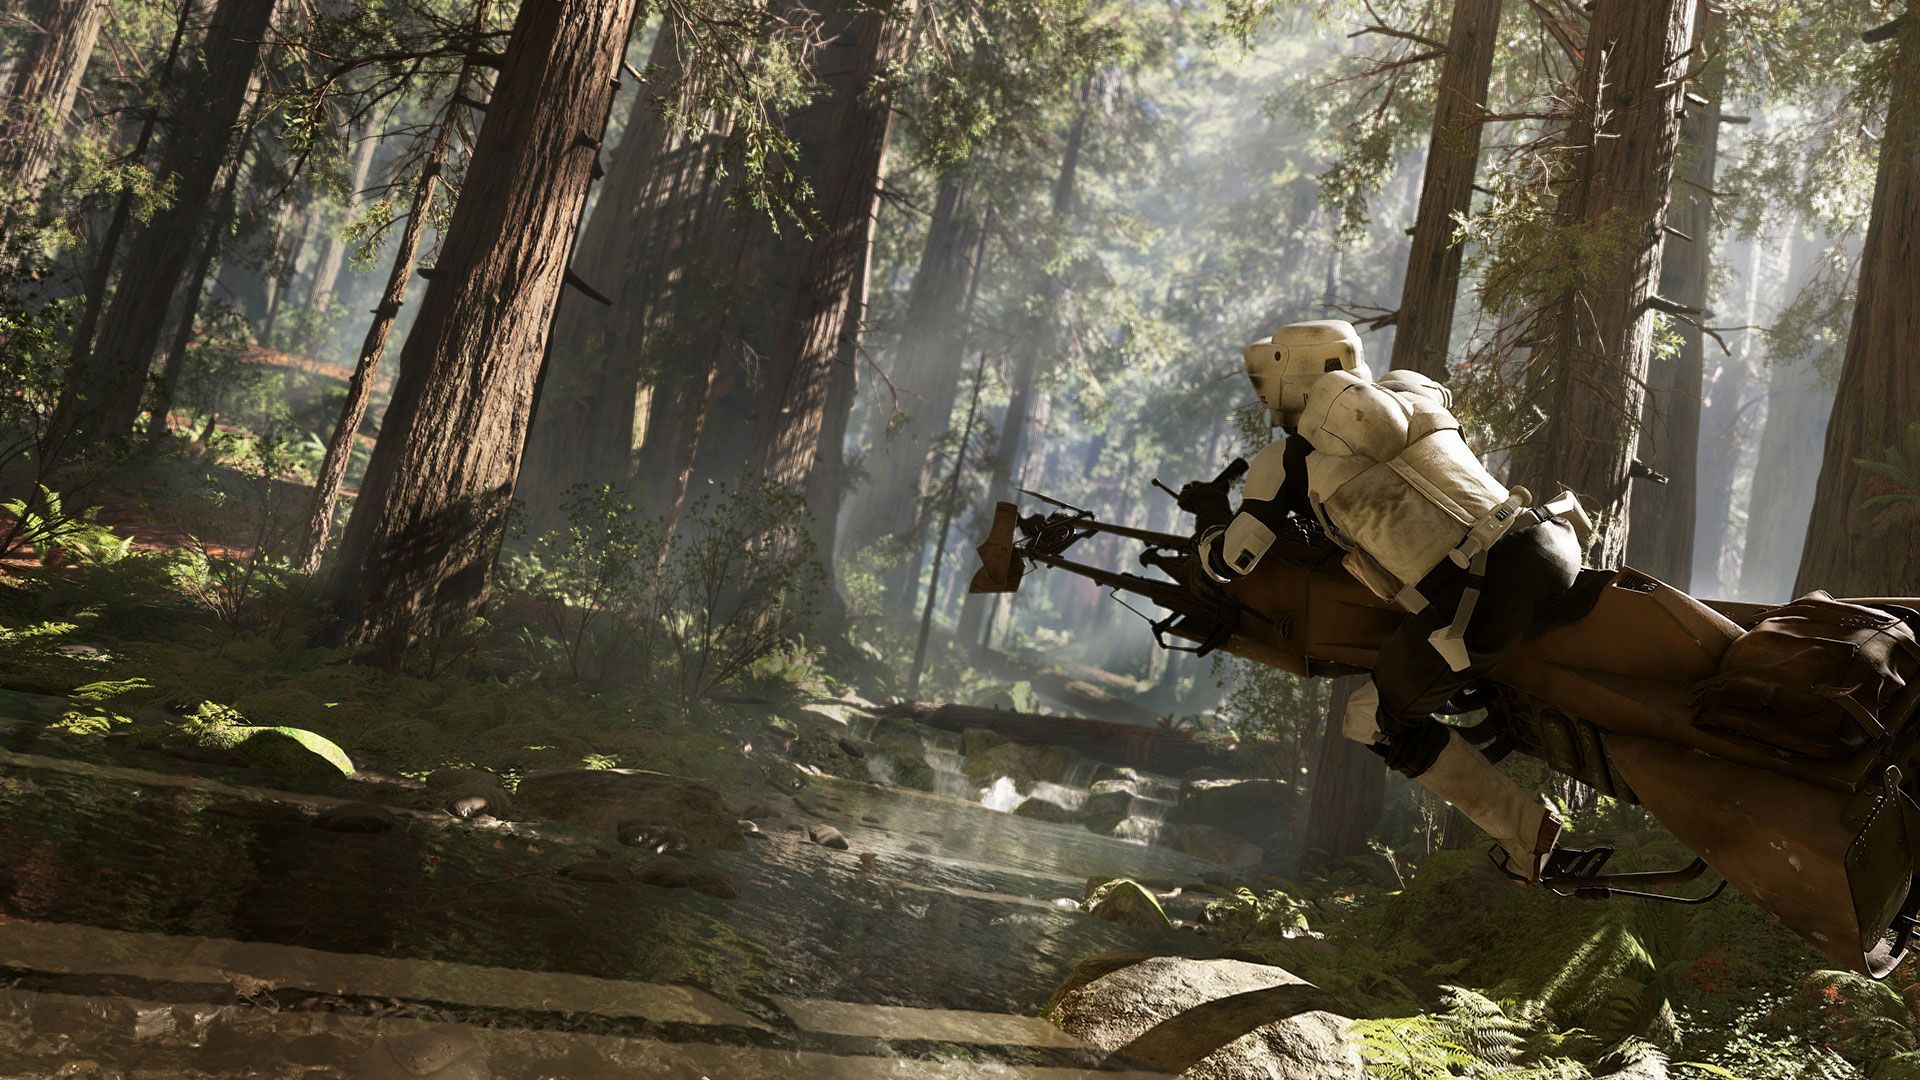 Wallpaper in 1080p from the Star Wars Battlefront webpage ...